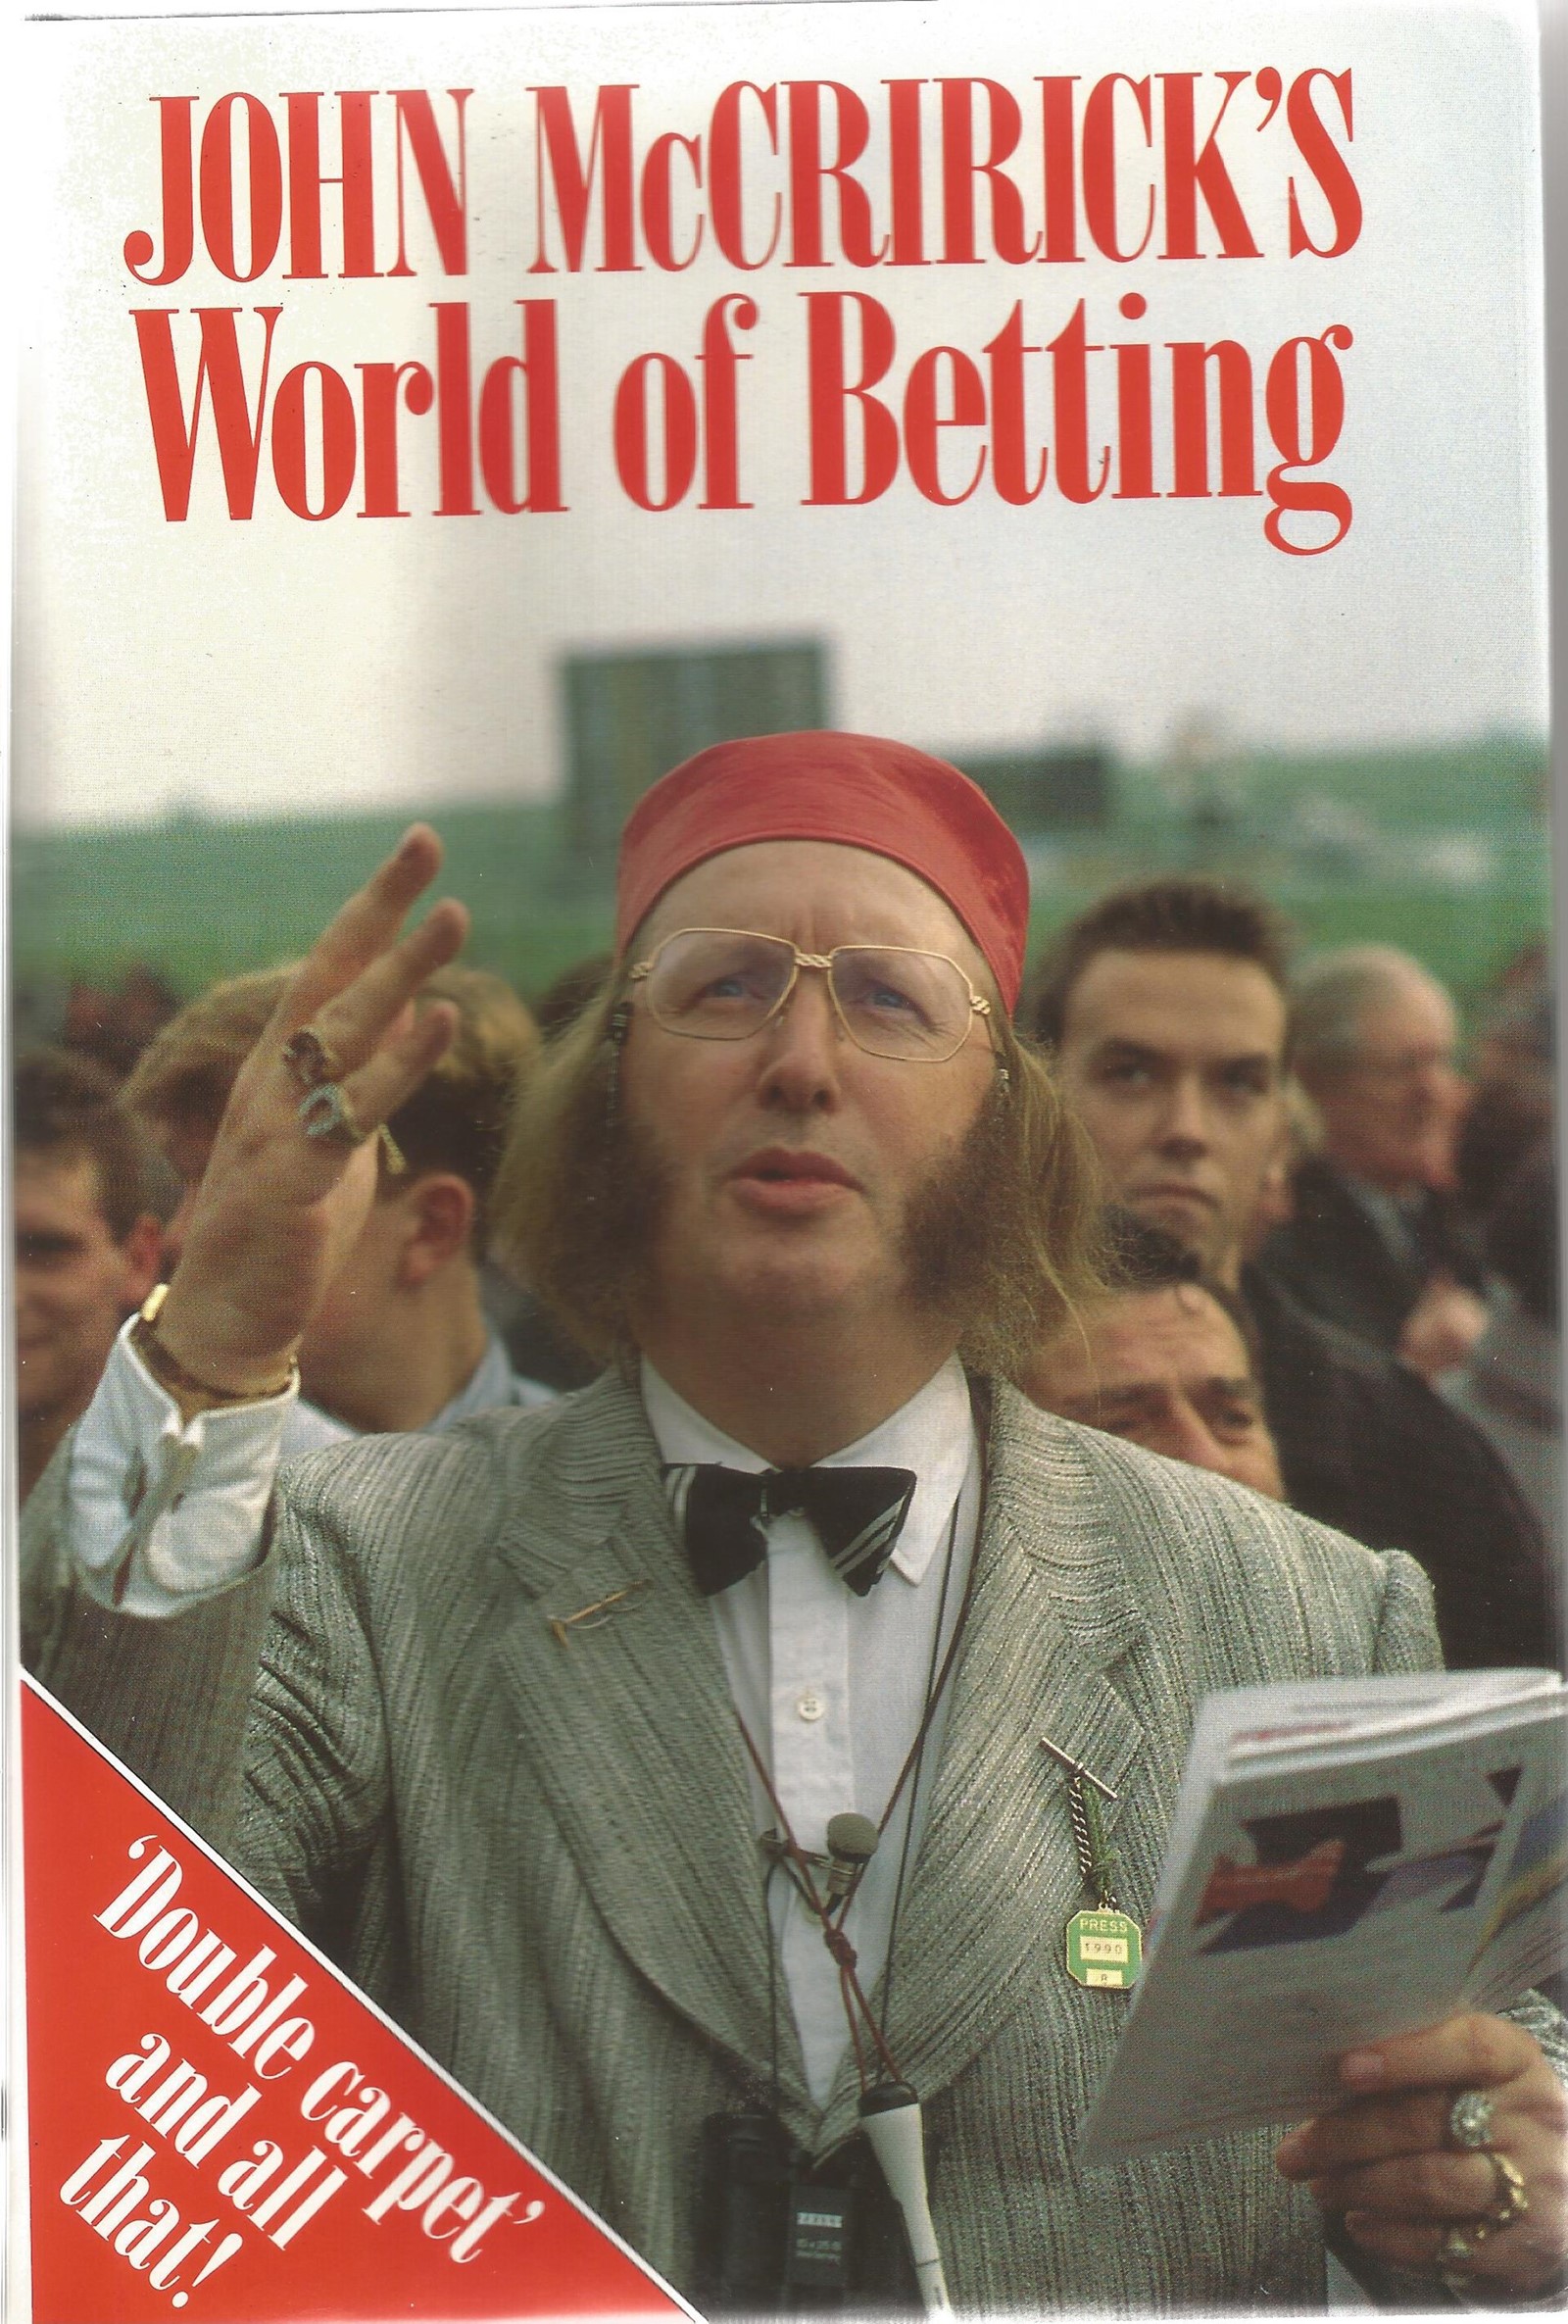 John McCriricks signed hardback book titled World of Betting Double Carpet and all that signed on